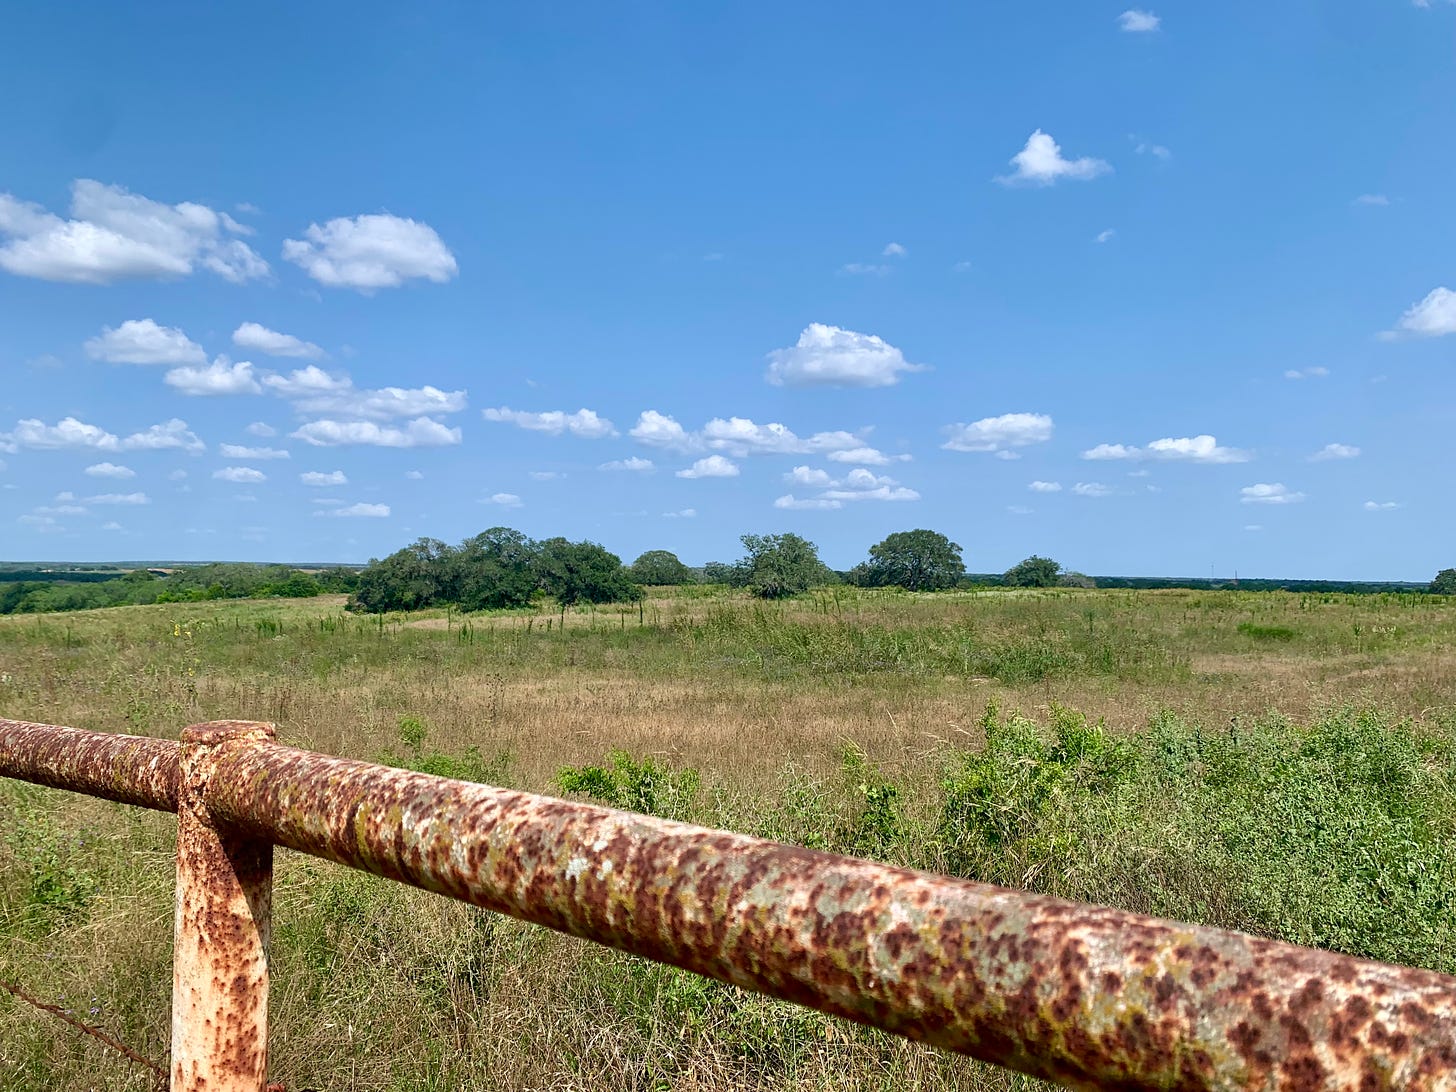 Image of an iron fence and field just outside La Vernia, Texas, on Erastus “Deaf” Smith’s Mexican Land Grant.